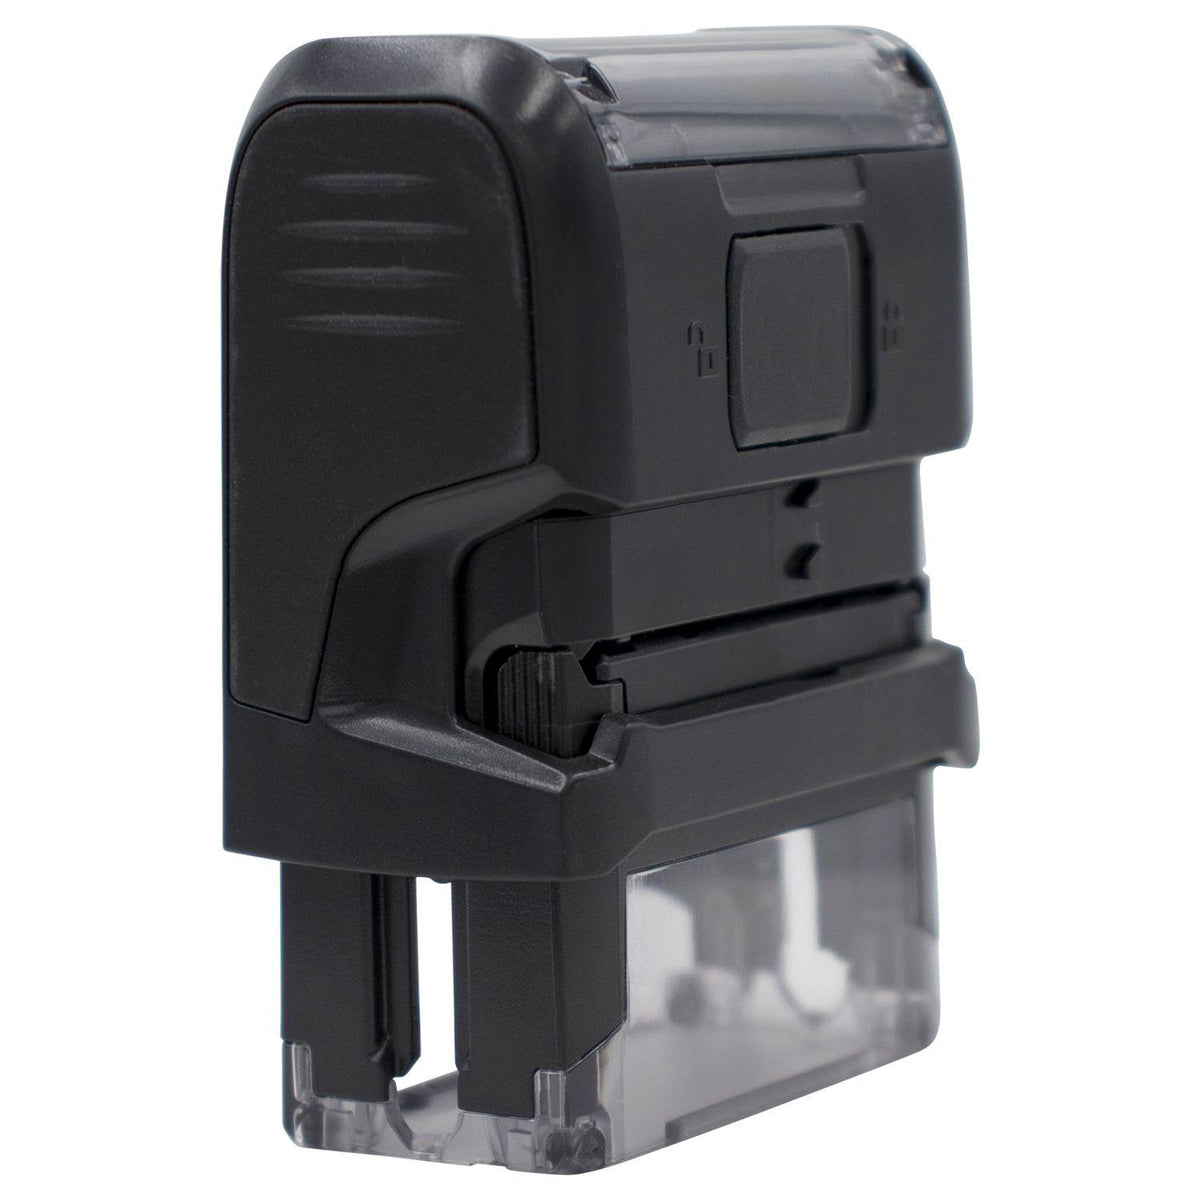 Self-Inking Telehealth Stamp - Engineer Seal Stamps - Brand_Trodat, Impression Size_Small, Stamp Type_Self-Inking Stamp, Type of Use_Medical Office